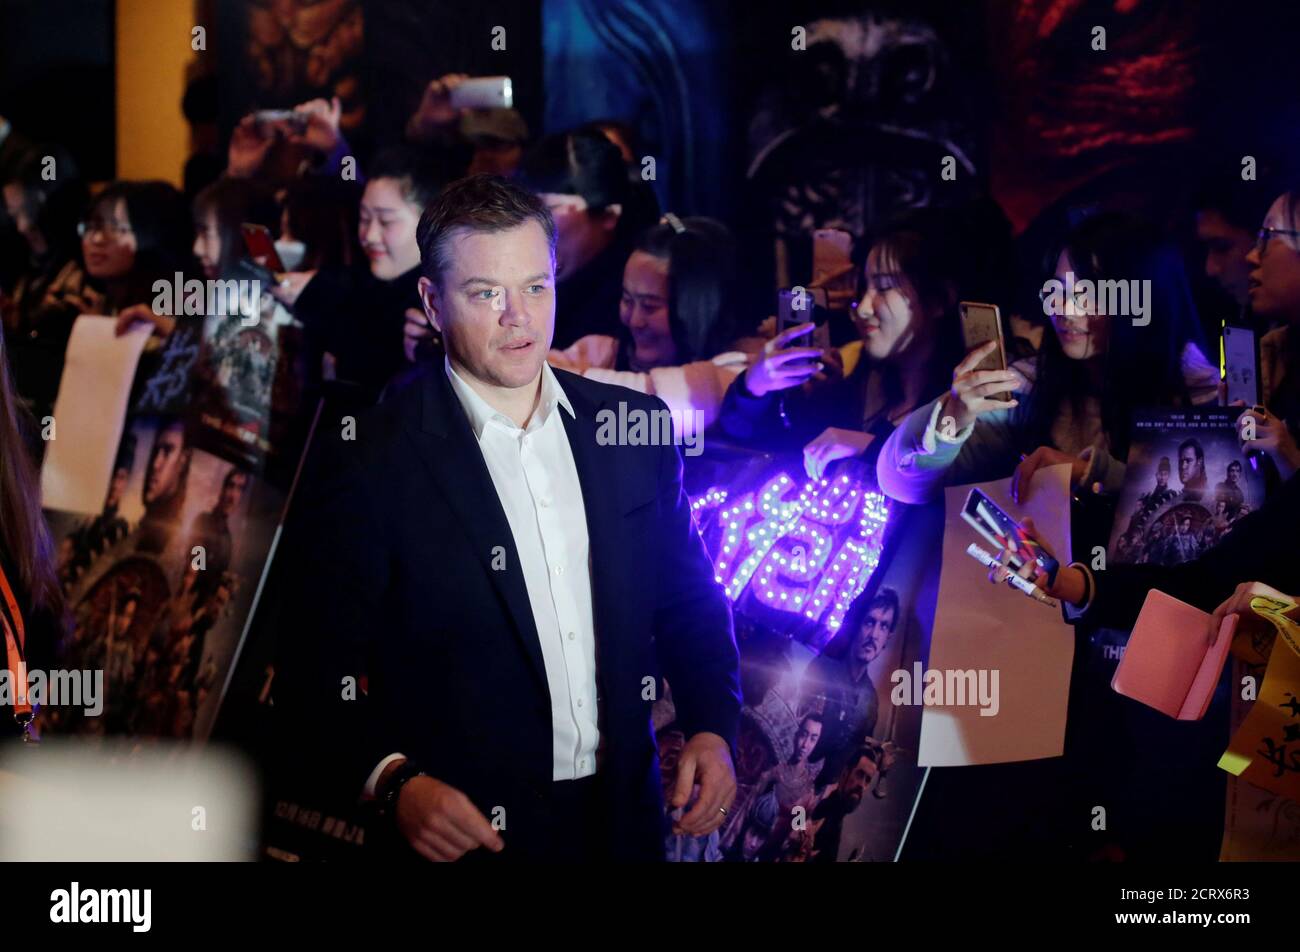 Actor Matt Damon attends a red carpet event promoting Chinese director Zhang Yimou's latest film 'Great Wall' in Beijing, China December 6, 2016. REUTERS/Jason Lee Stock Photo